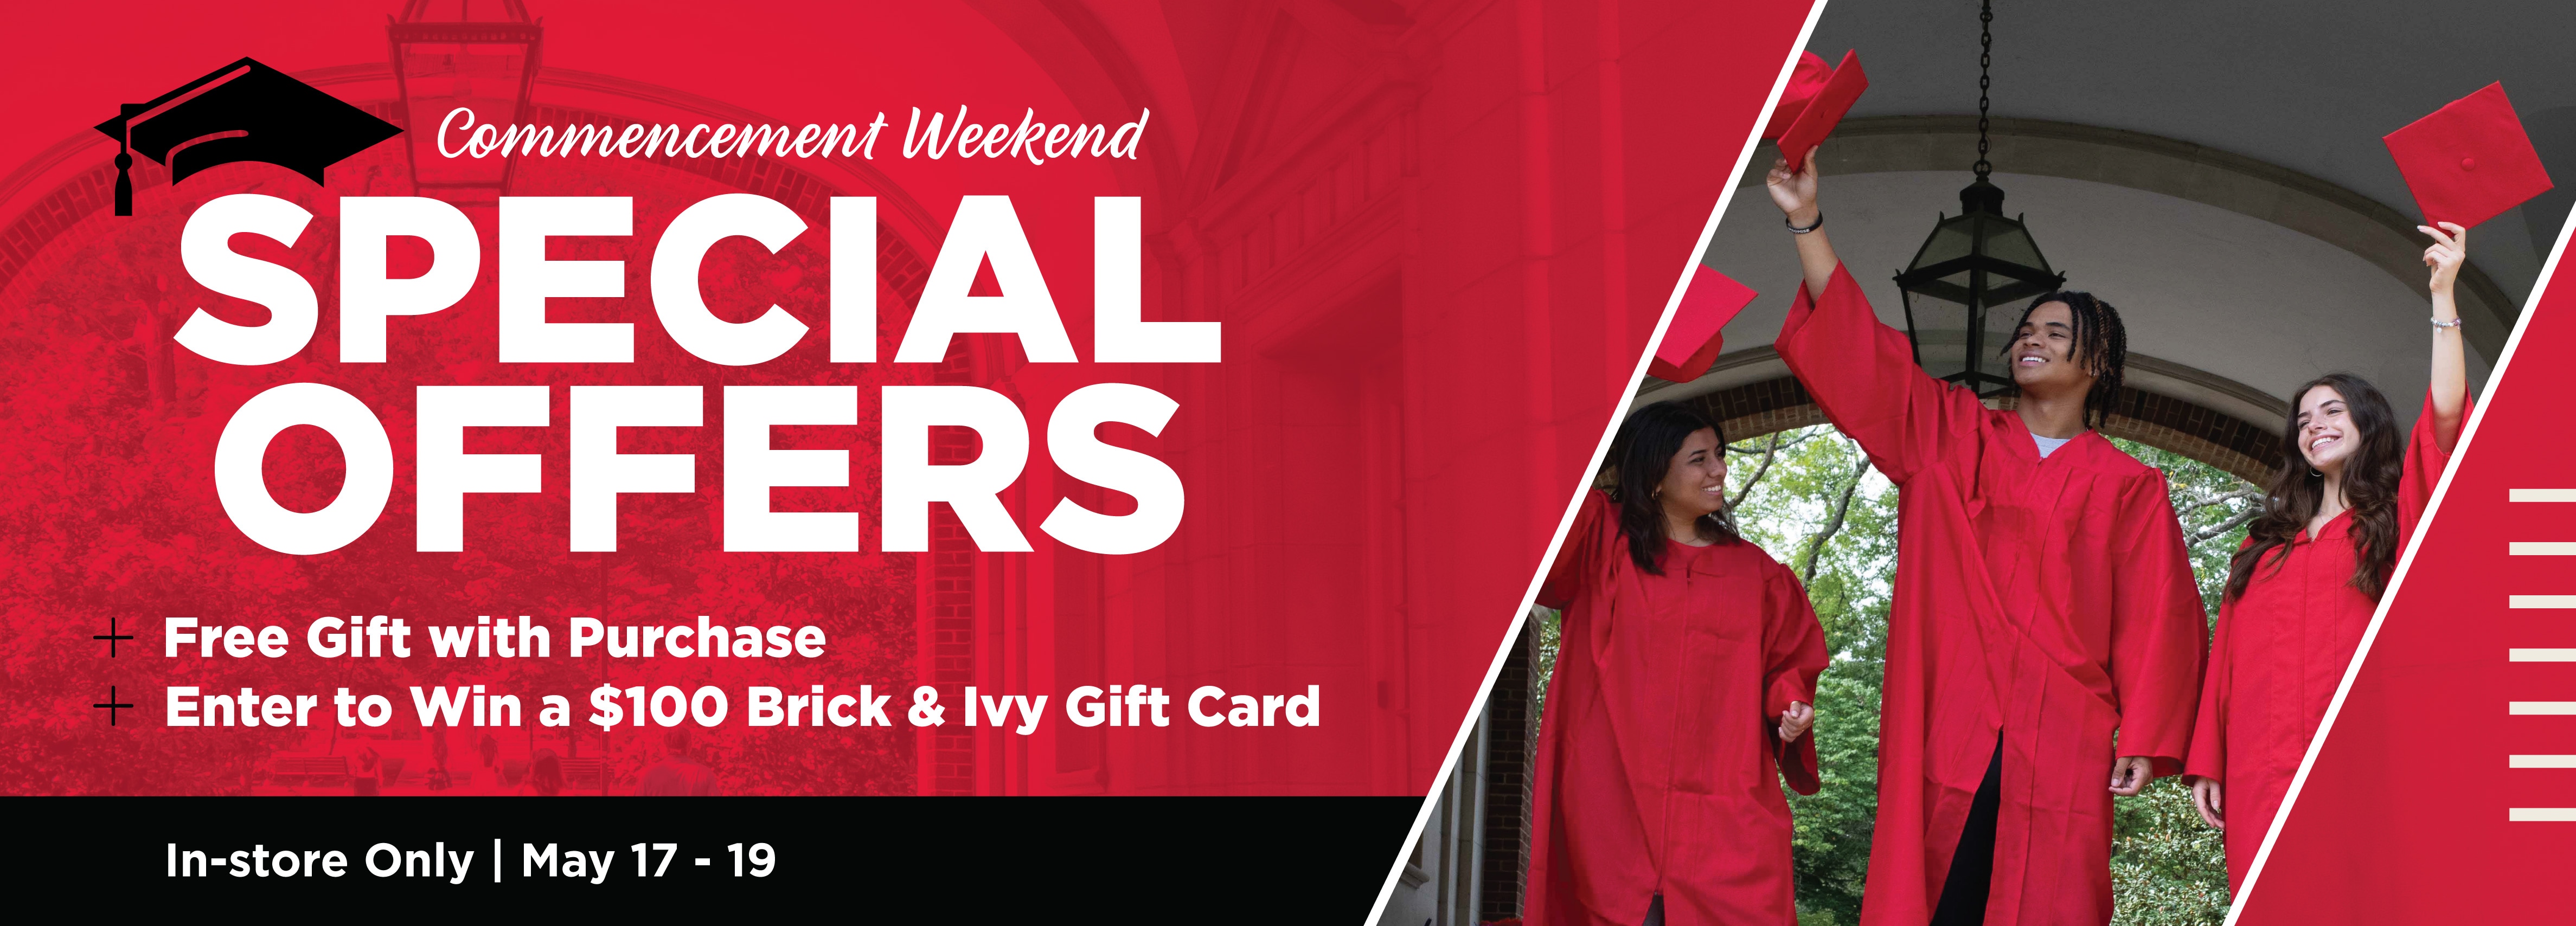 Commencement Weekend Special Offers - Free Gift with Purchase - Enter to Win a $100 Brick & Ivy Gift Card In-Store Only | May 17 - 19